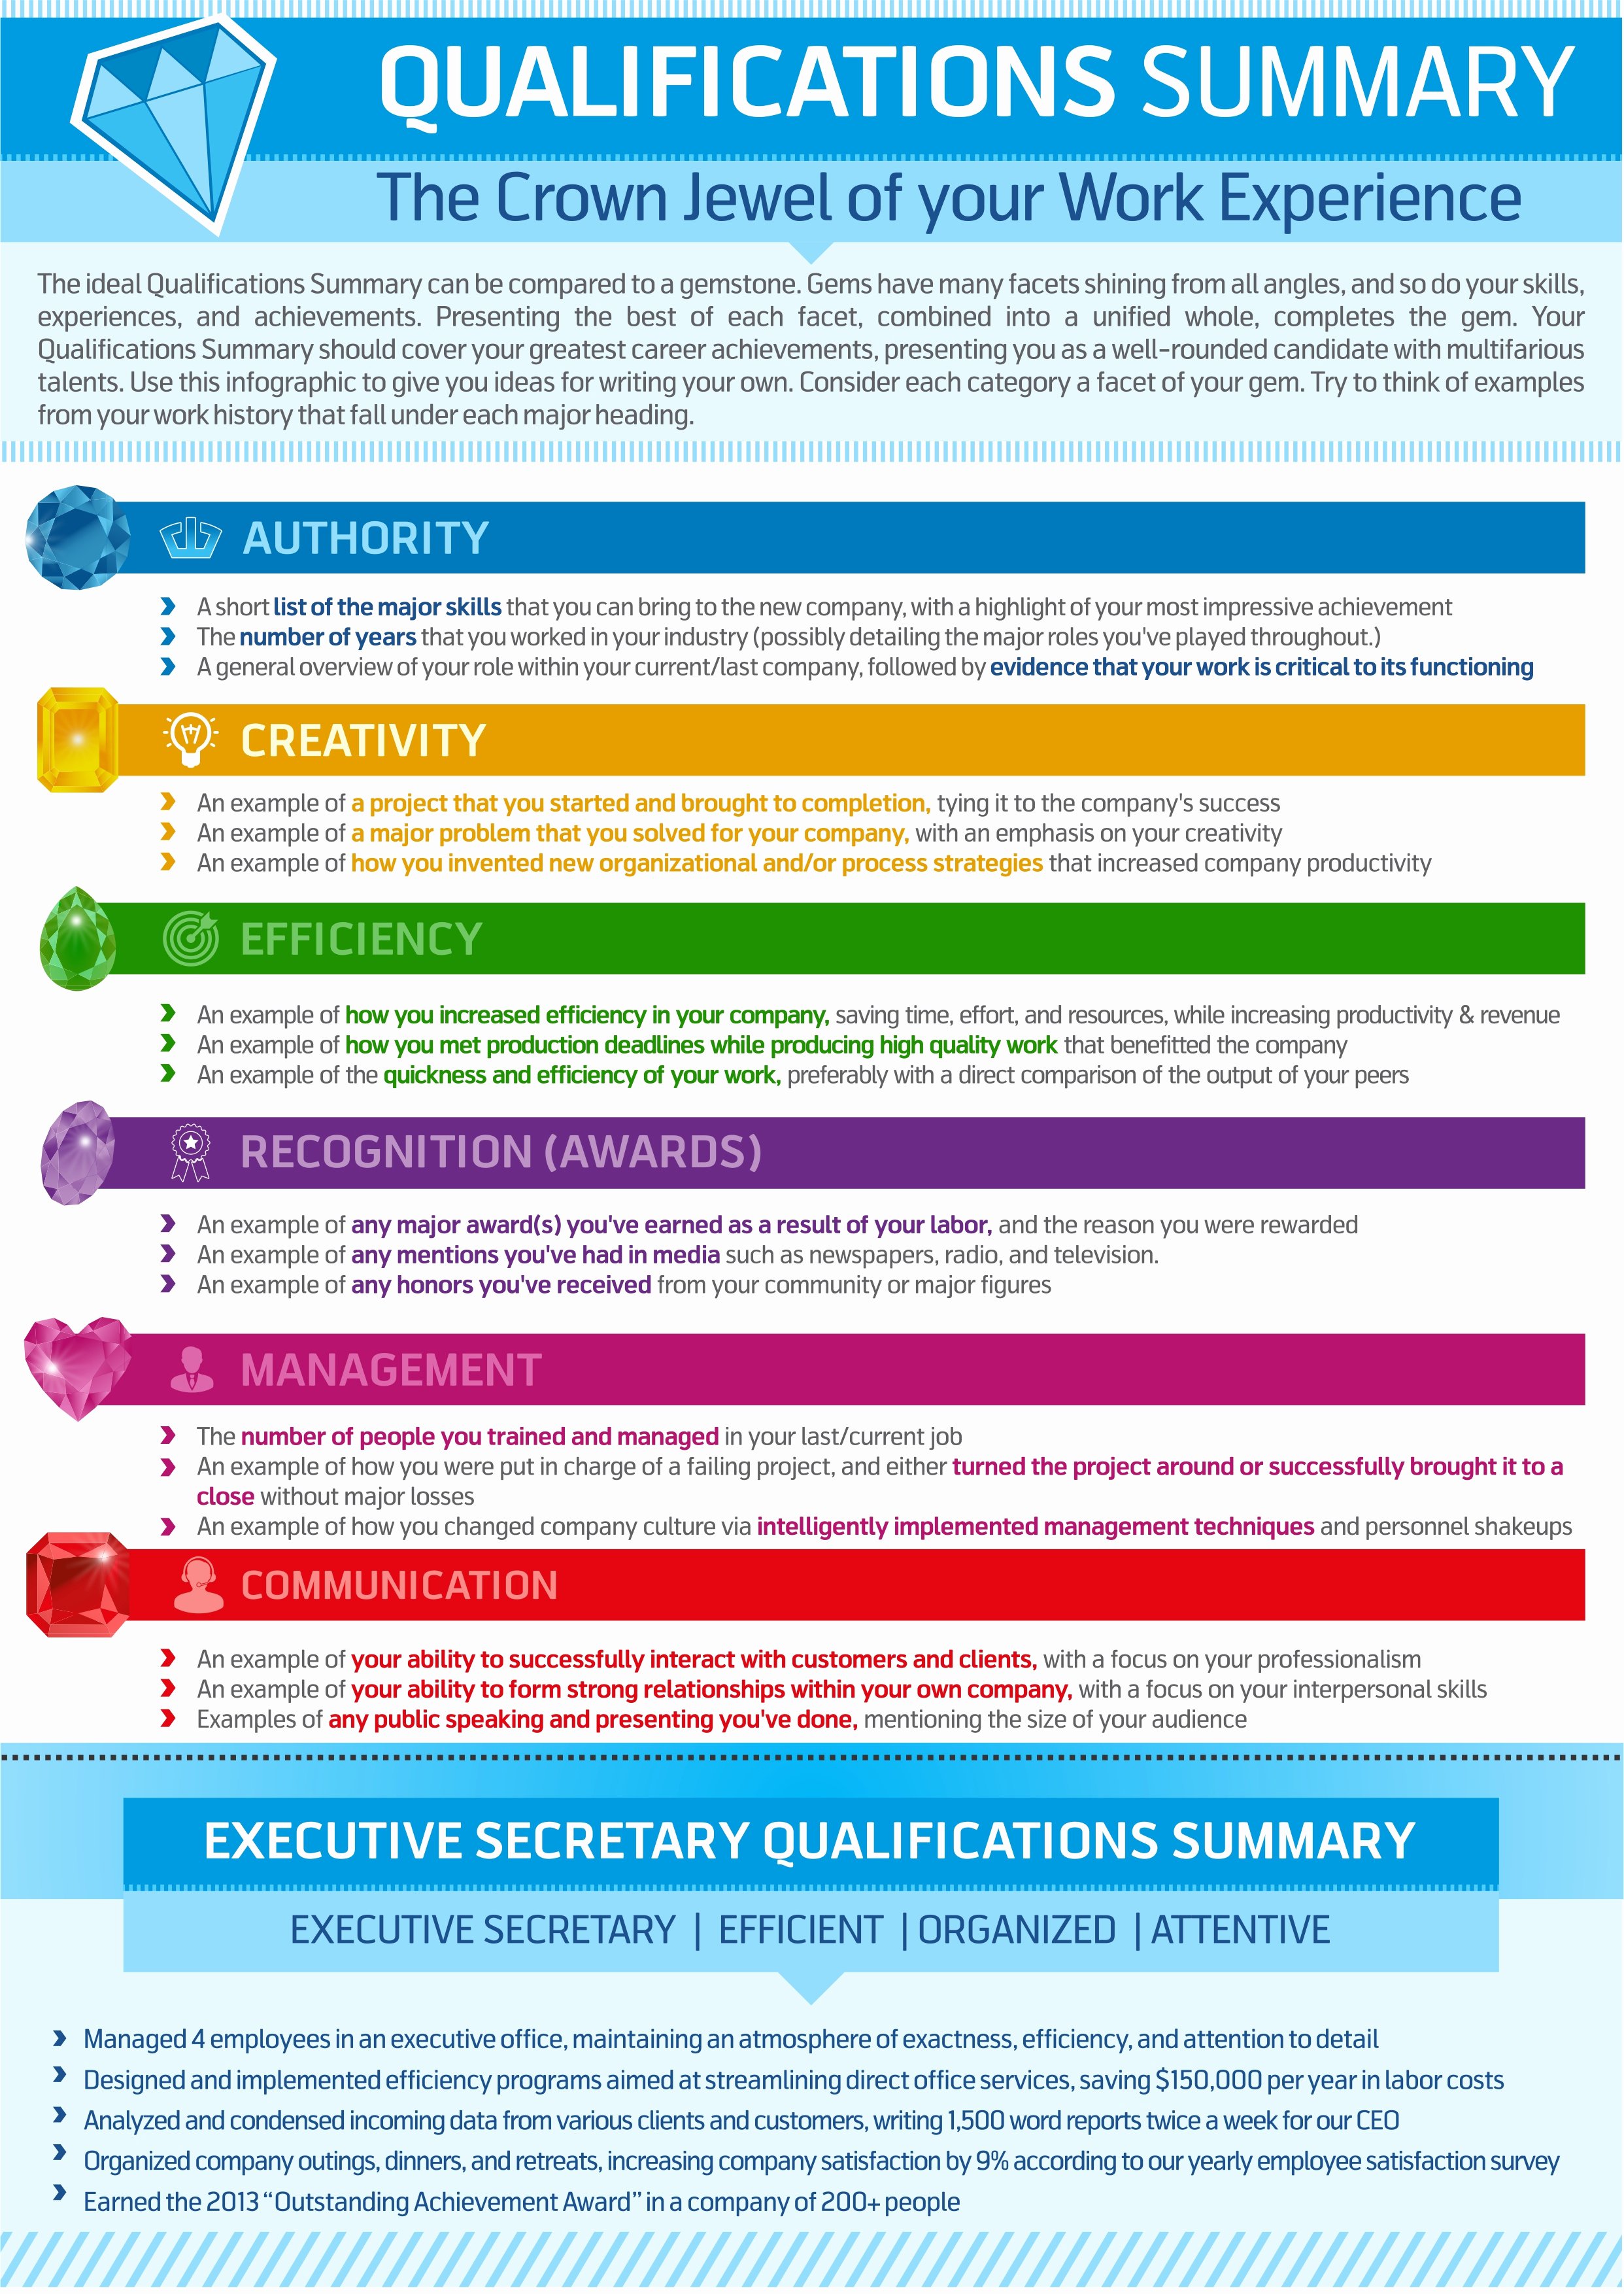 How to Write A Qualifications Summary